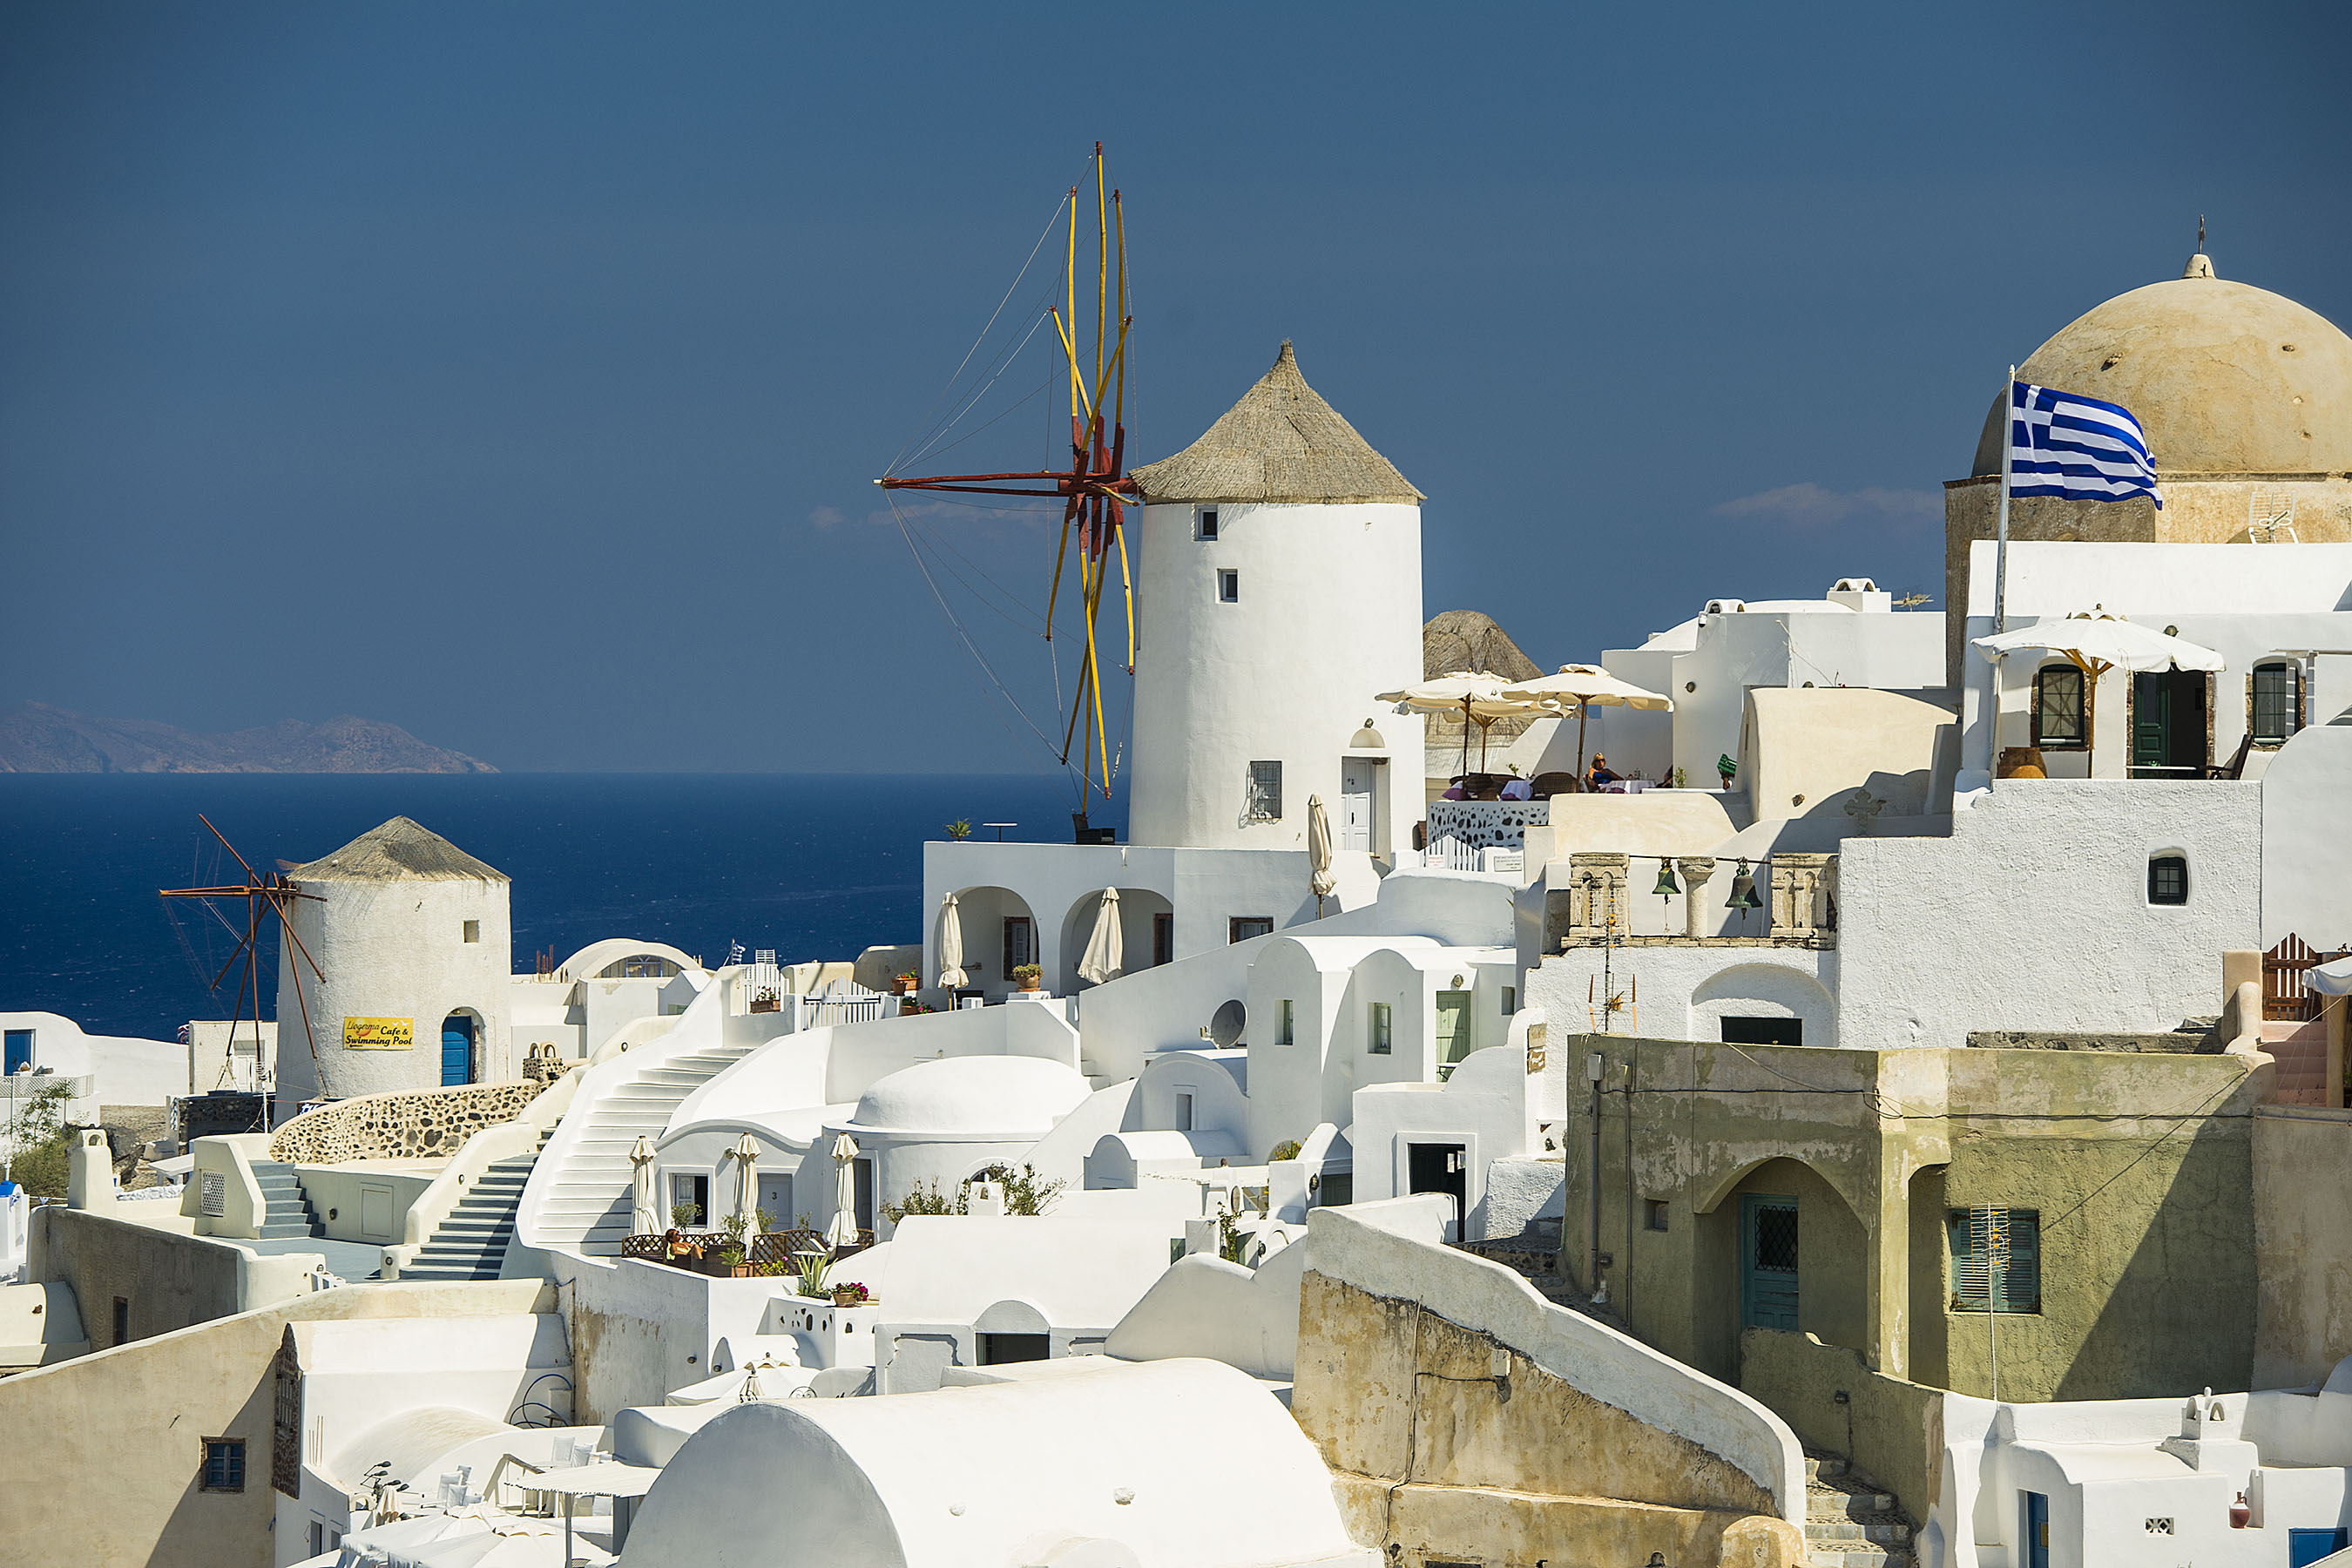 Disney Cruise Line will return to the awe-inspiring beauty of Greece in summer 2021